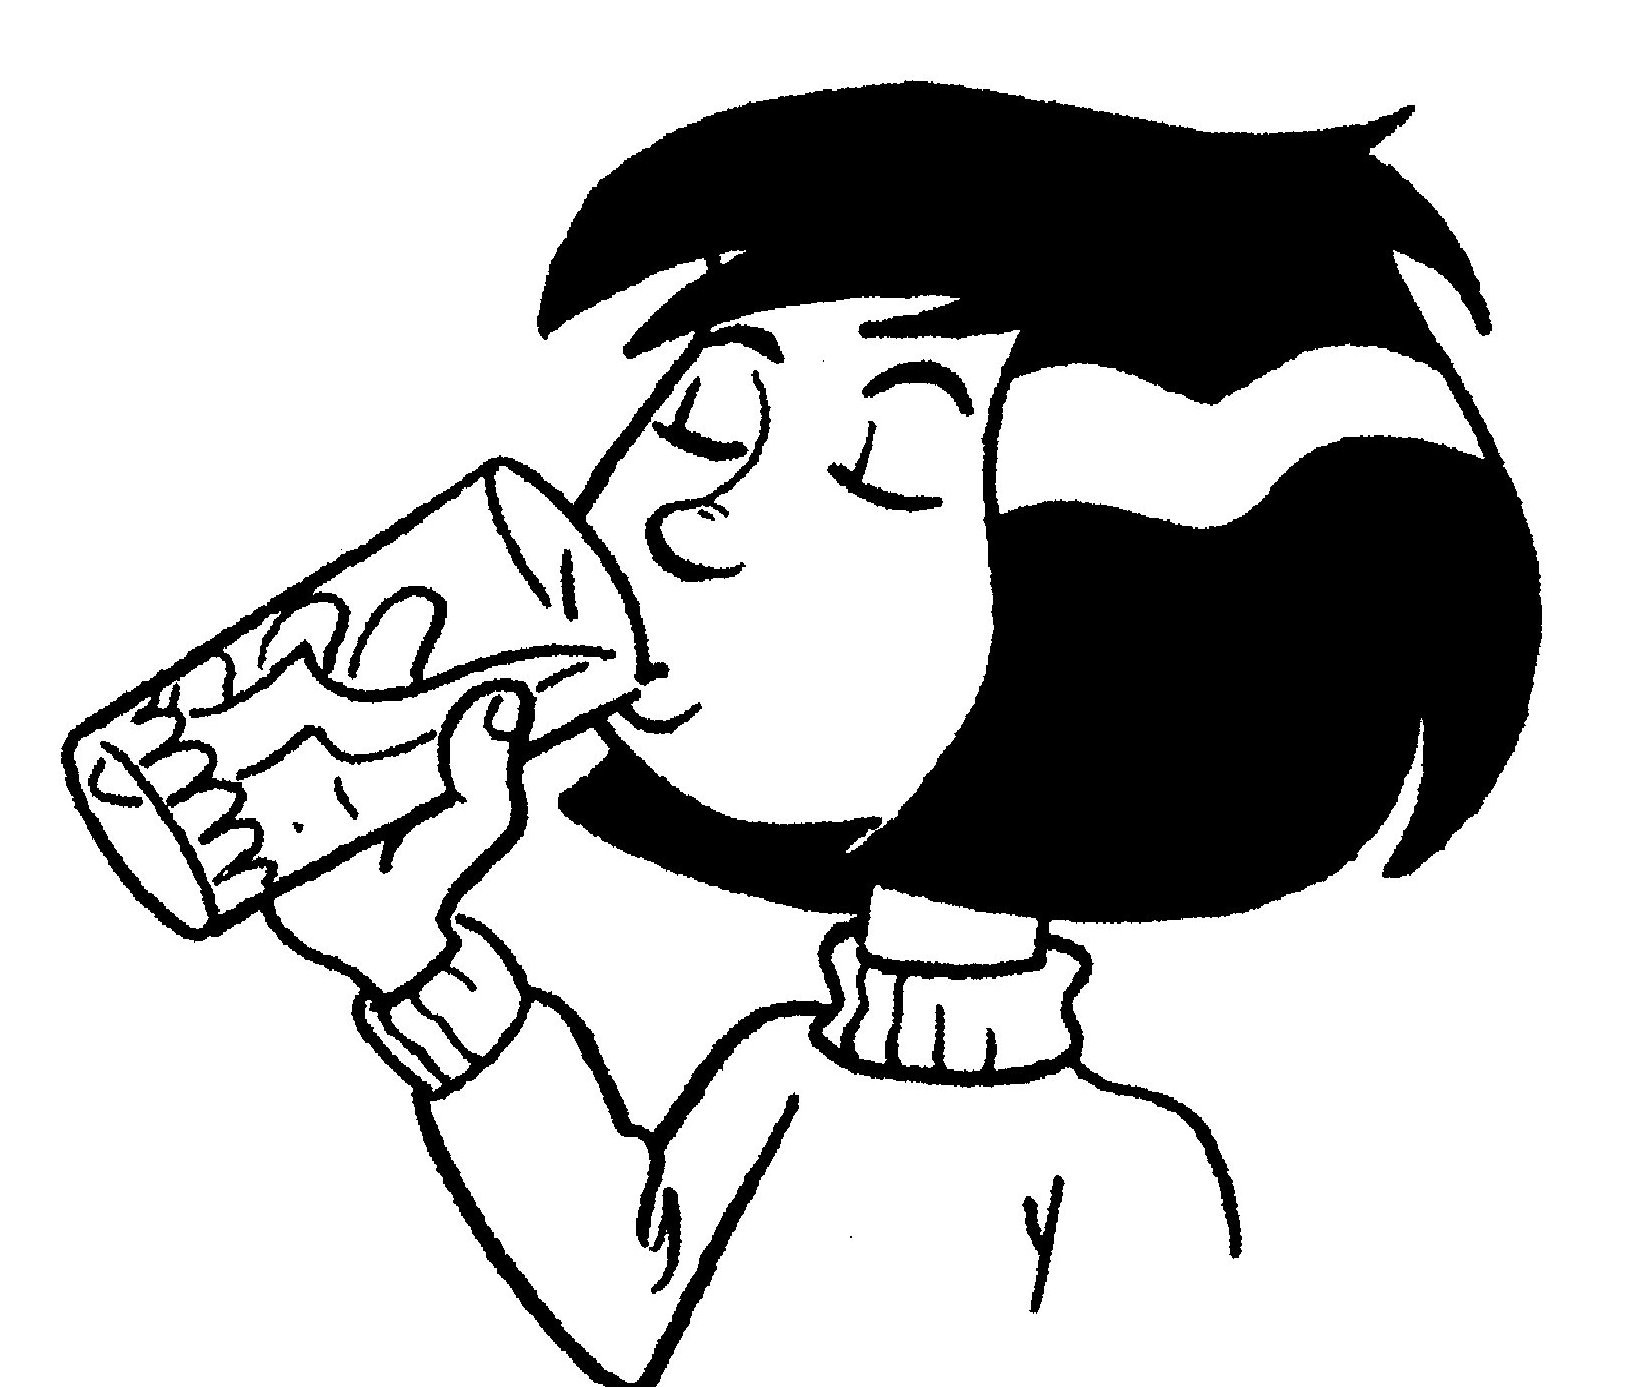 Man drinking from carton clipart black and white